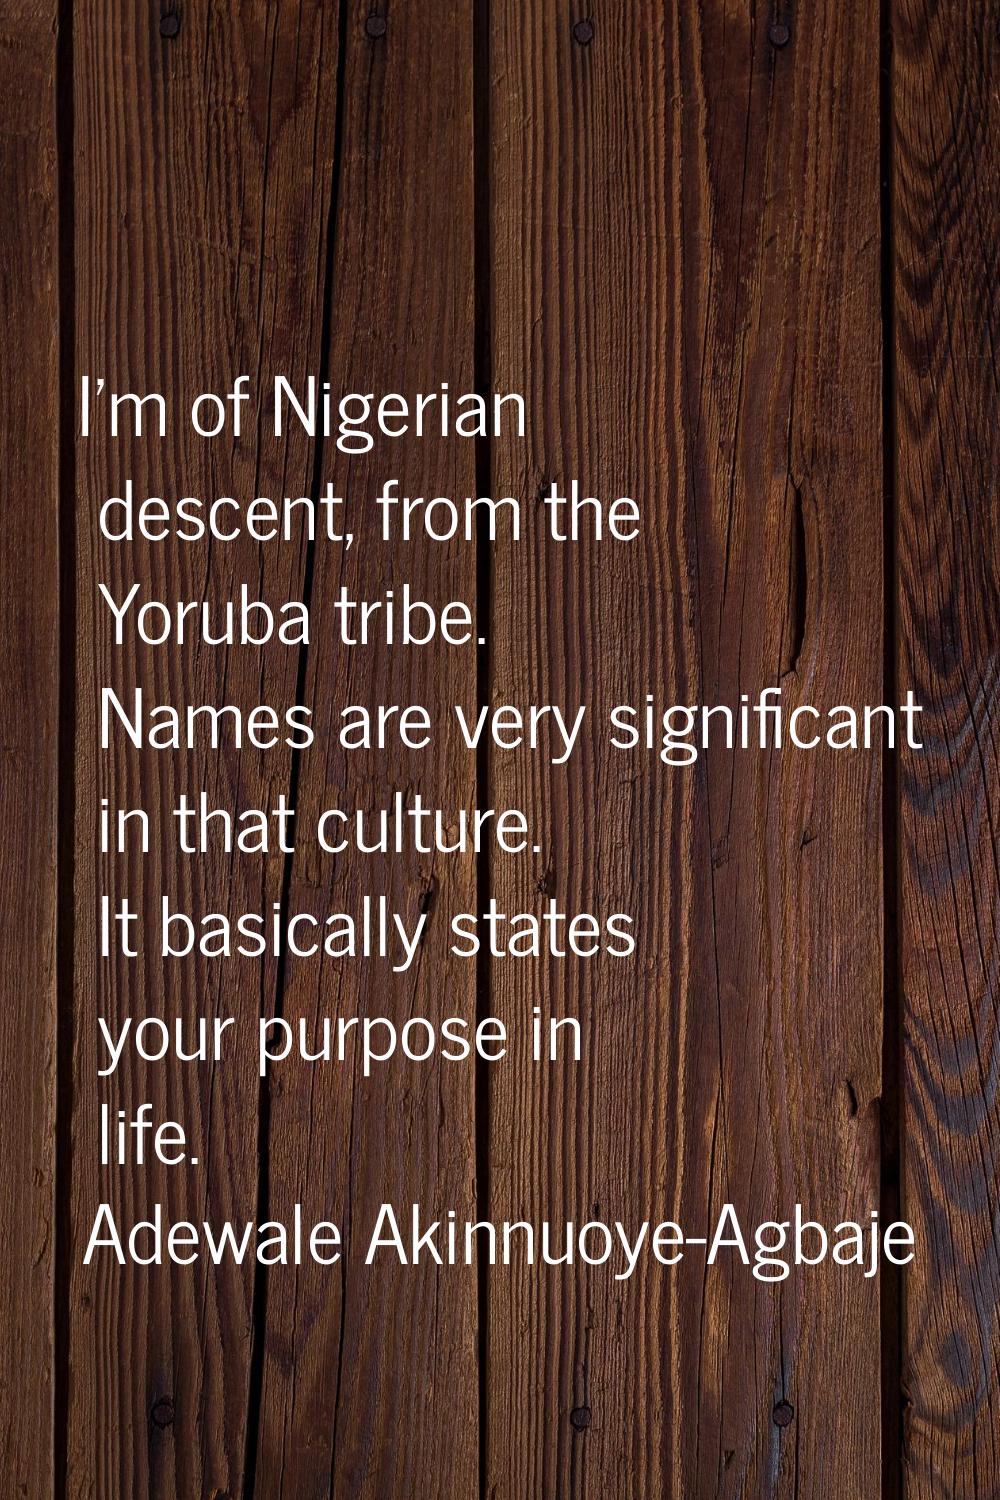 I'm of Nigerian descent, from the Yoruba tribe. Names are very significant in that culture. It basi